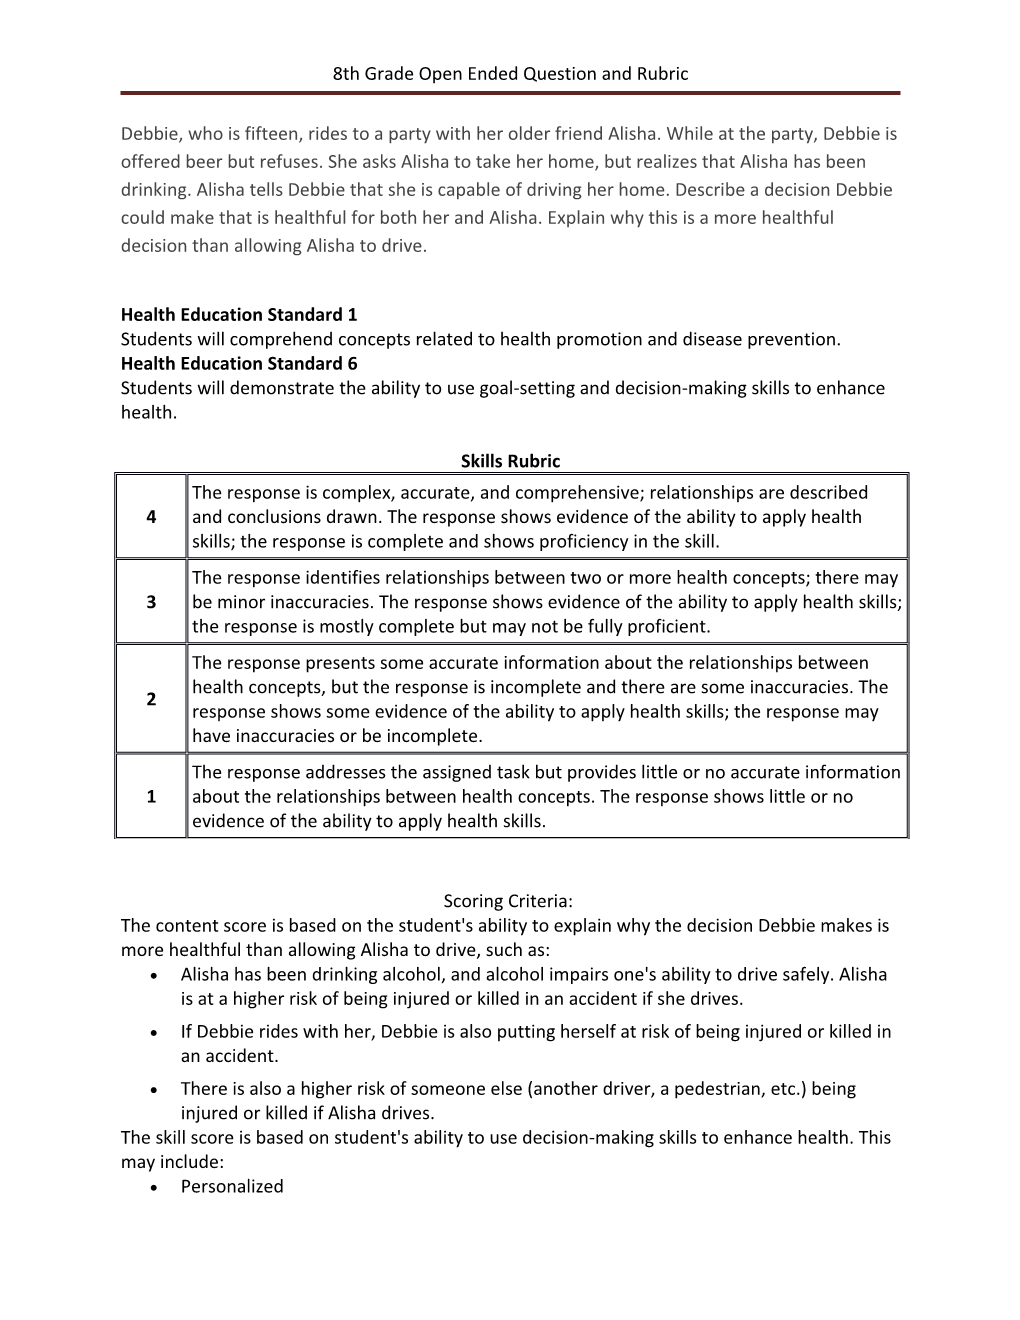 8Th Grade Open Ended Question and Rubric